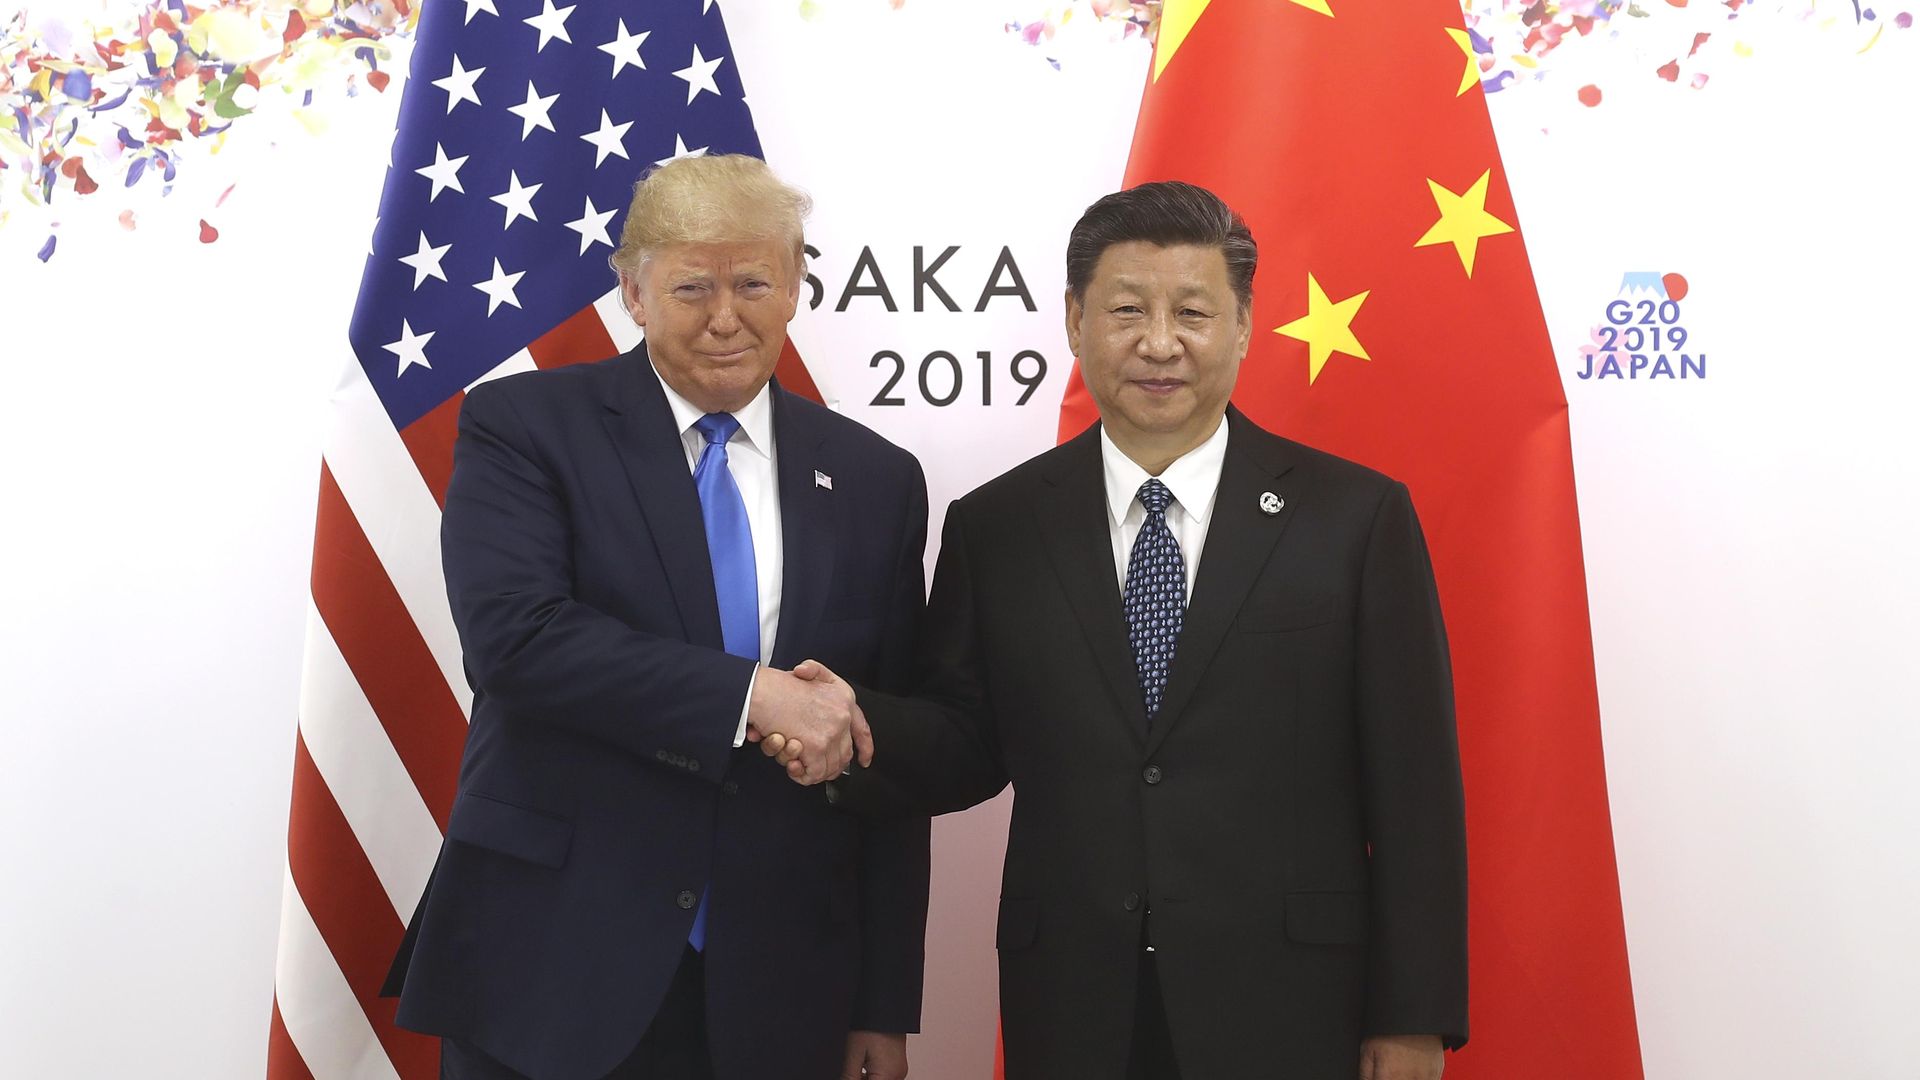 Trump shakes hands with Xi Jinping at G20 summit